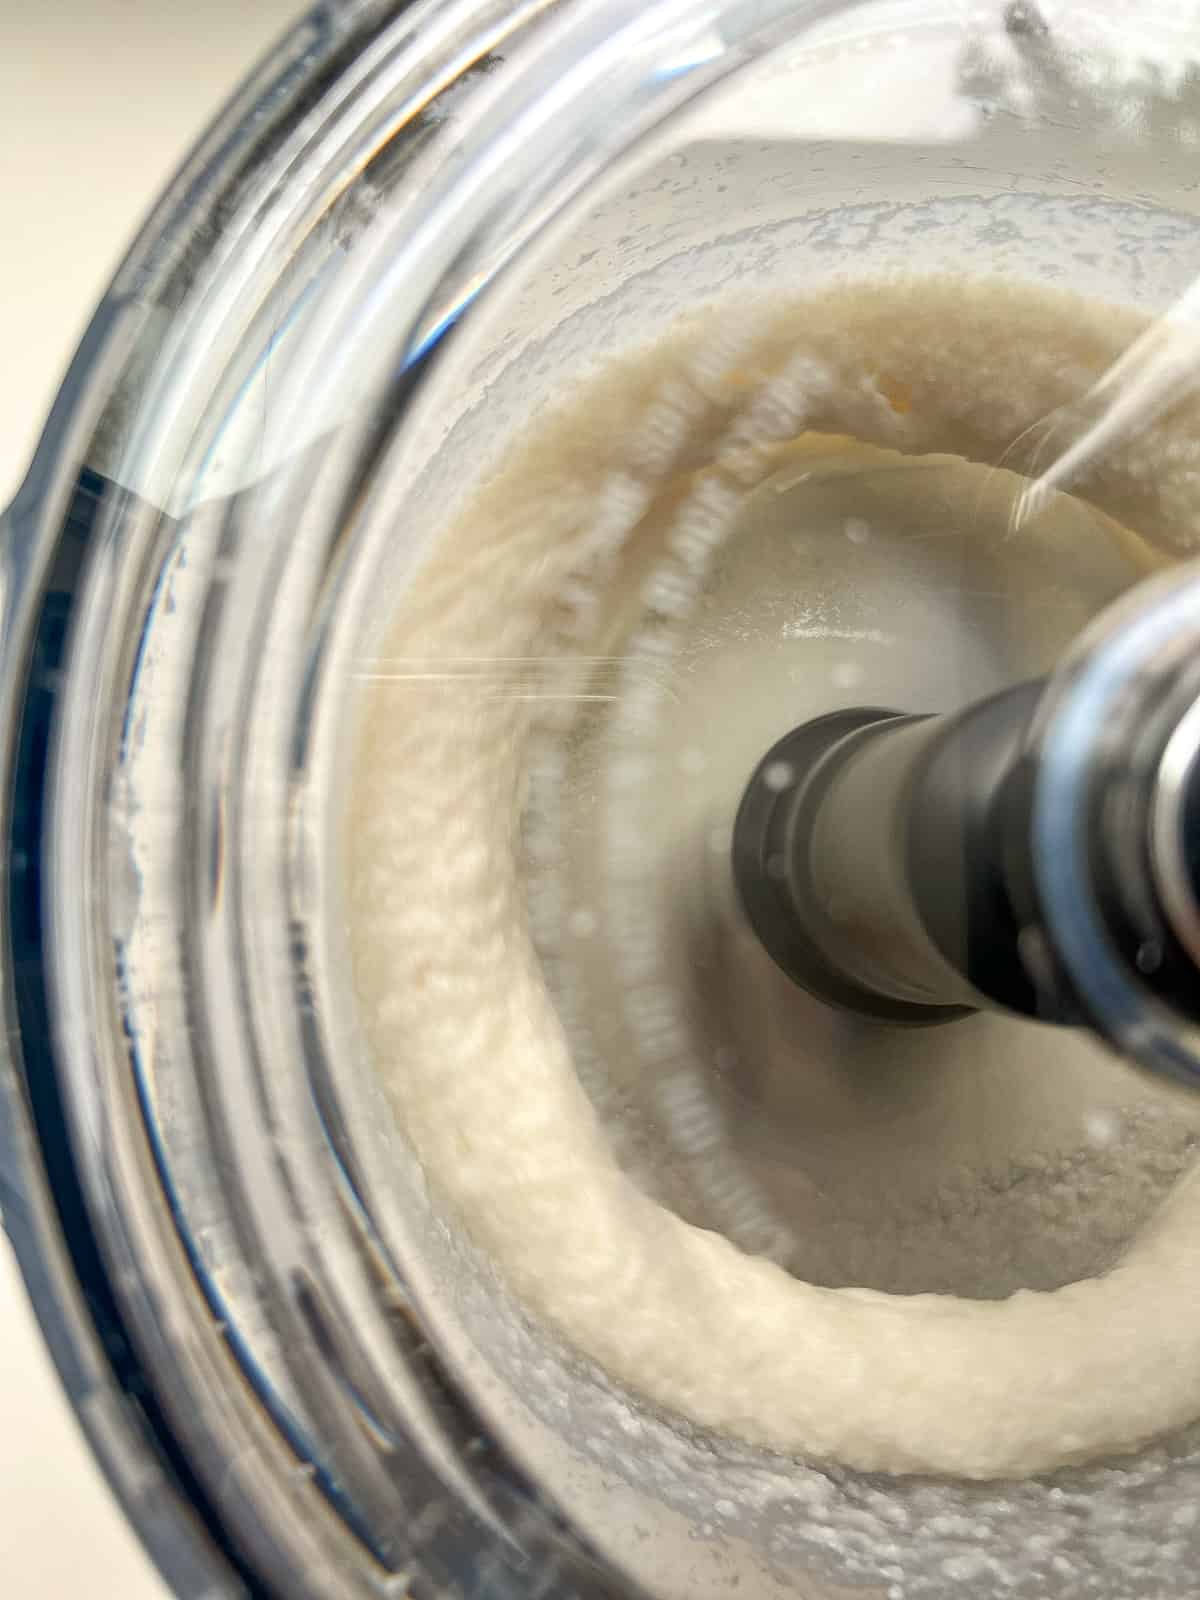 An image of shredded coconut being processed into coconut butter.